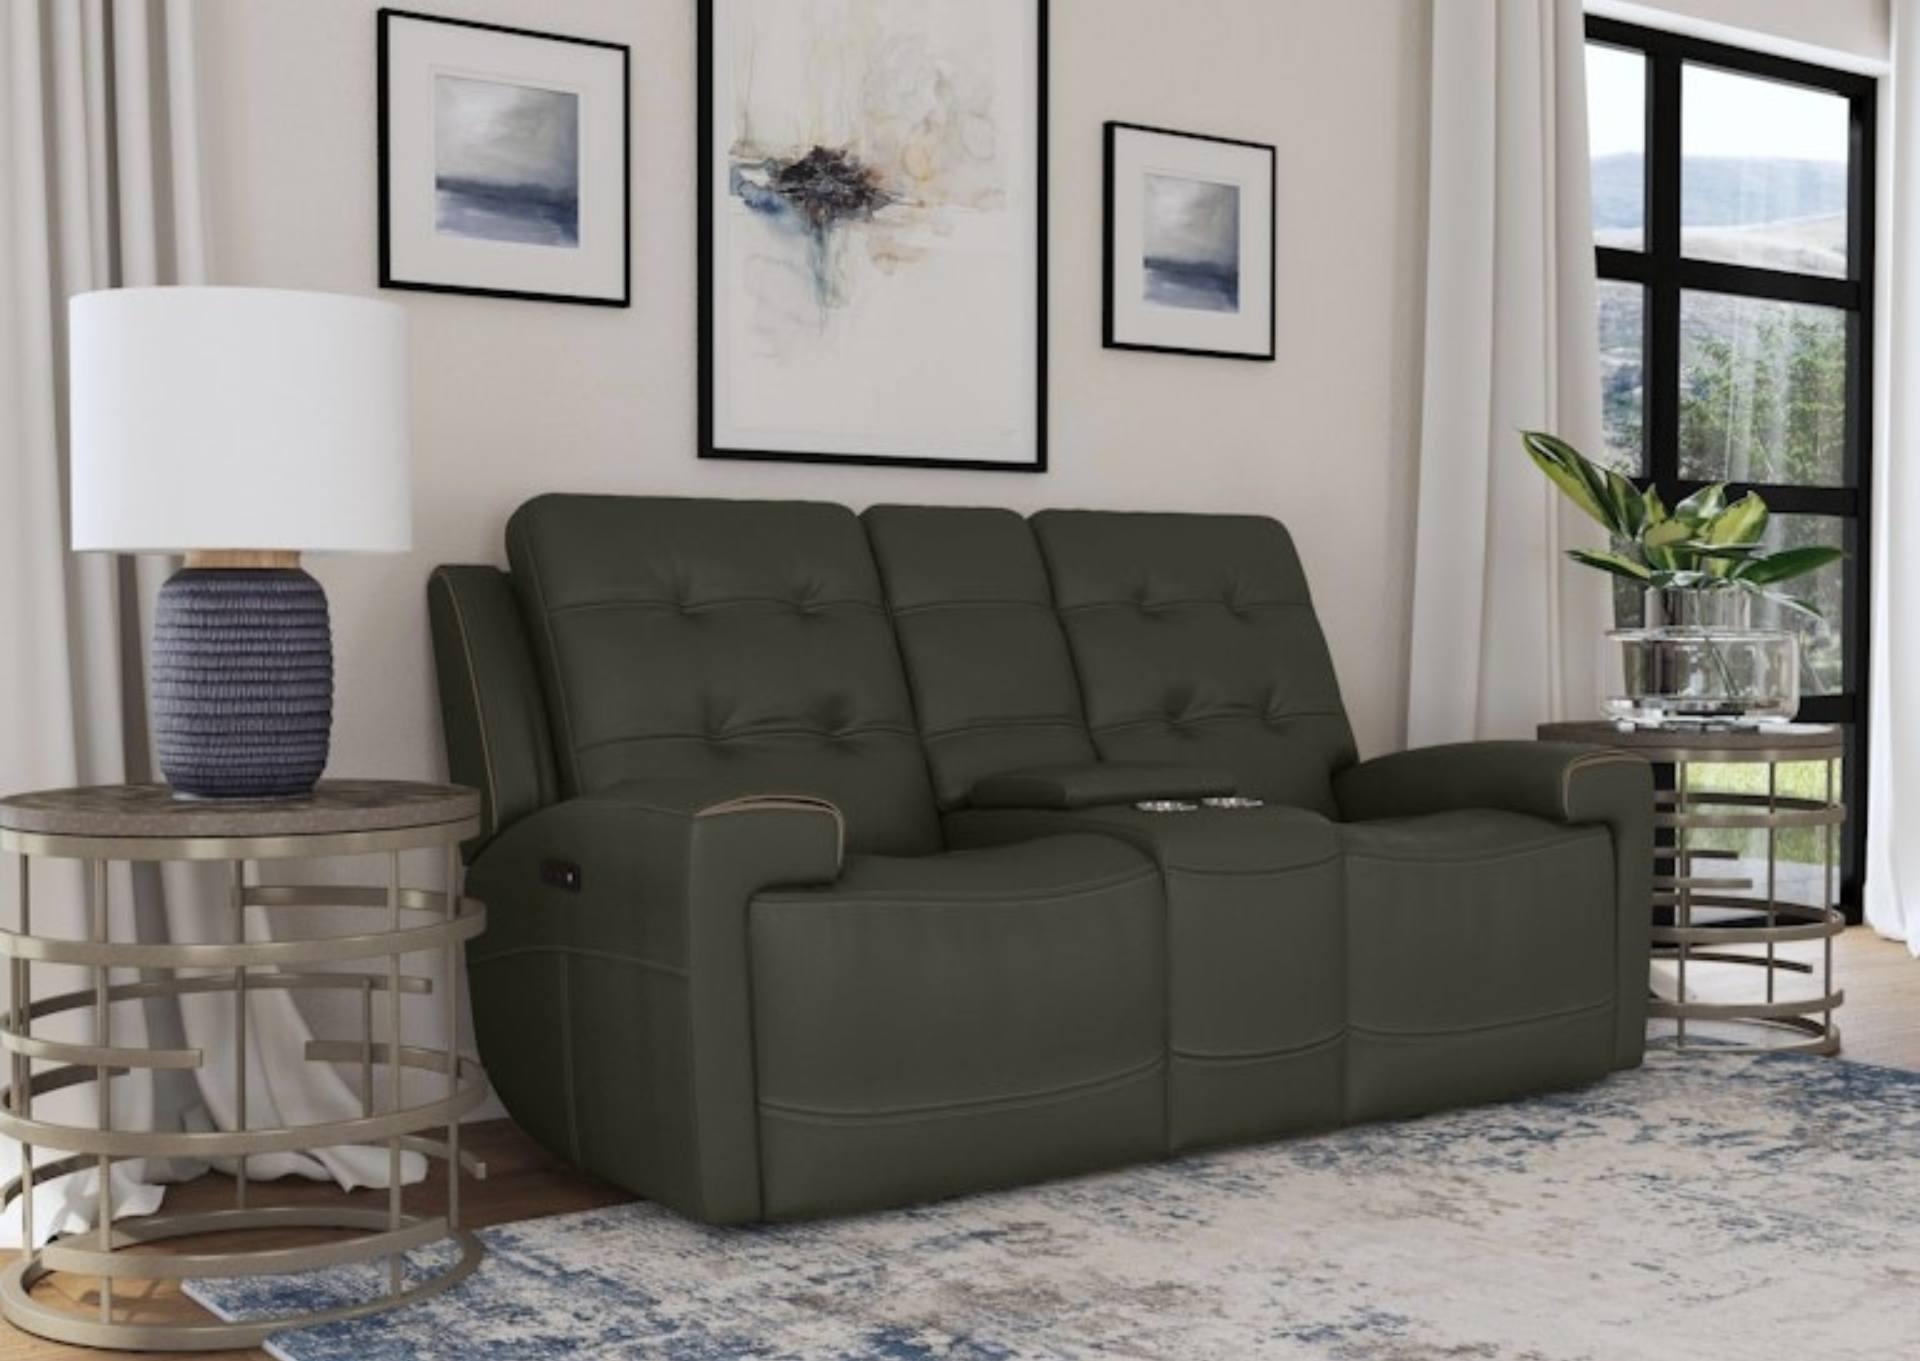 IRIS CHARCOAL RECLINING POWER LOVESEAT WITH CONSOLE P2,FLEXSTEEL INDUSTRIES INC.